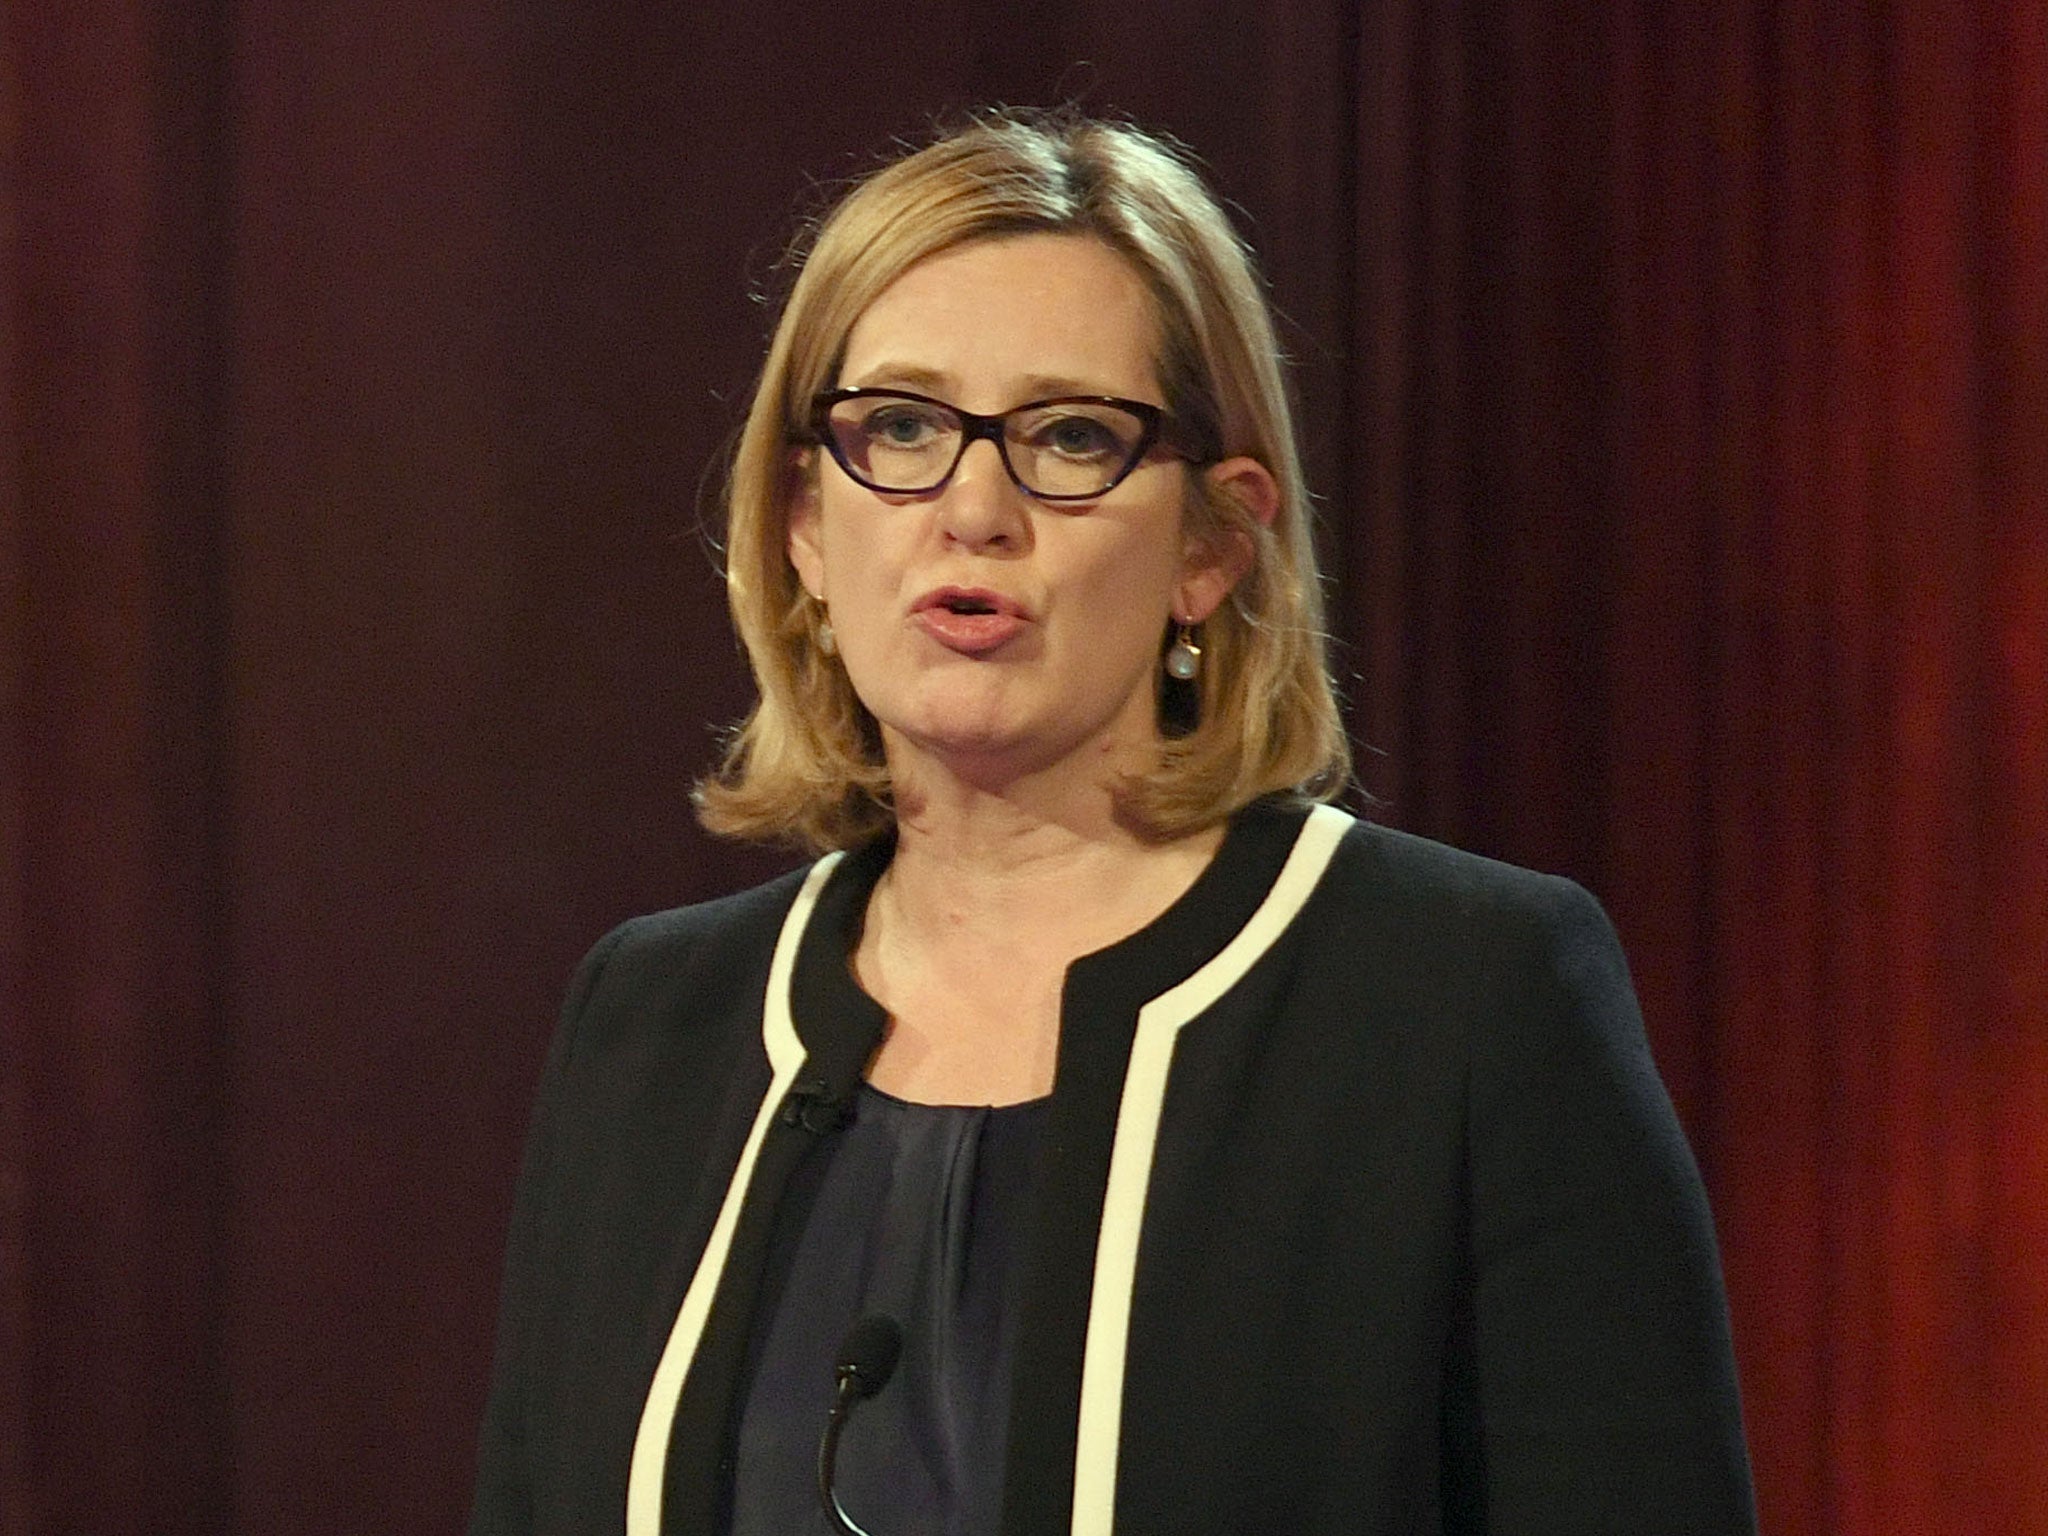 Home Secretary Amber Rudd has targeted encrypted messaging